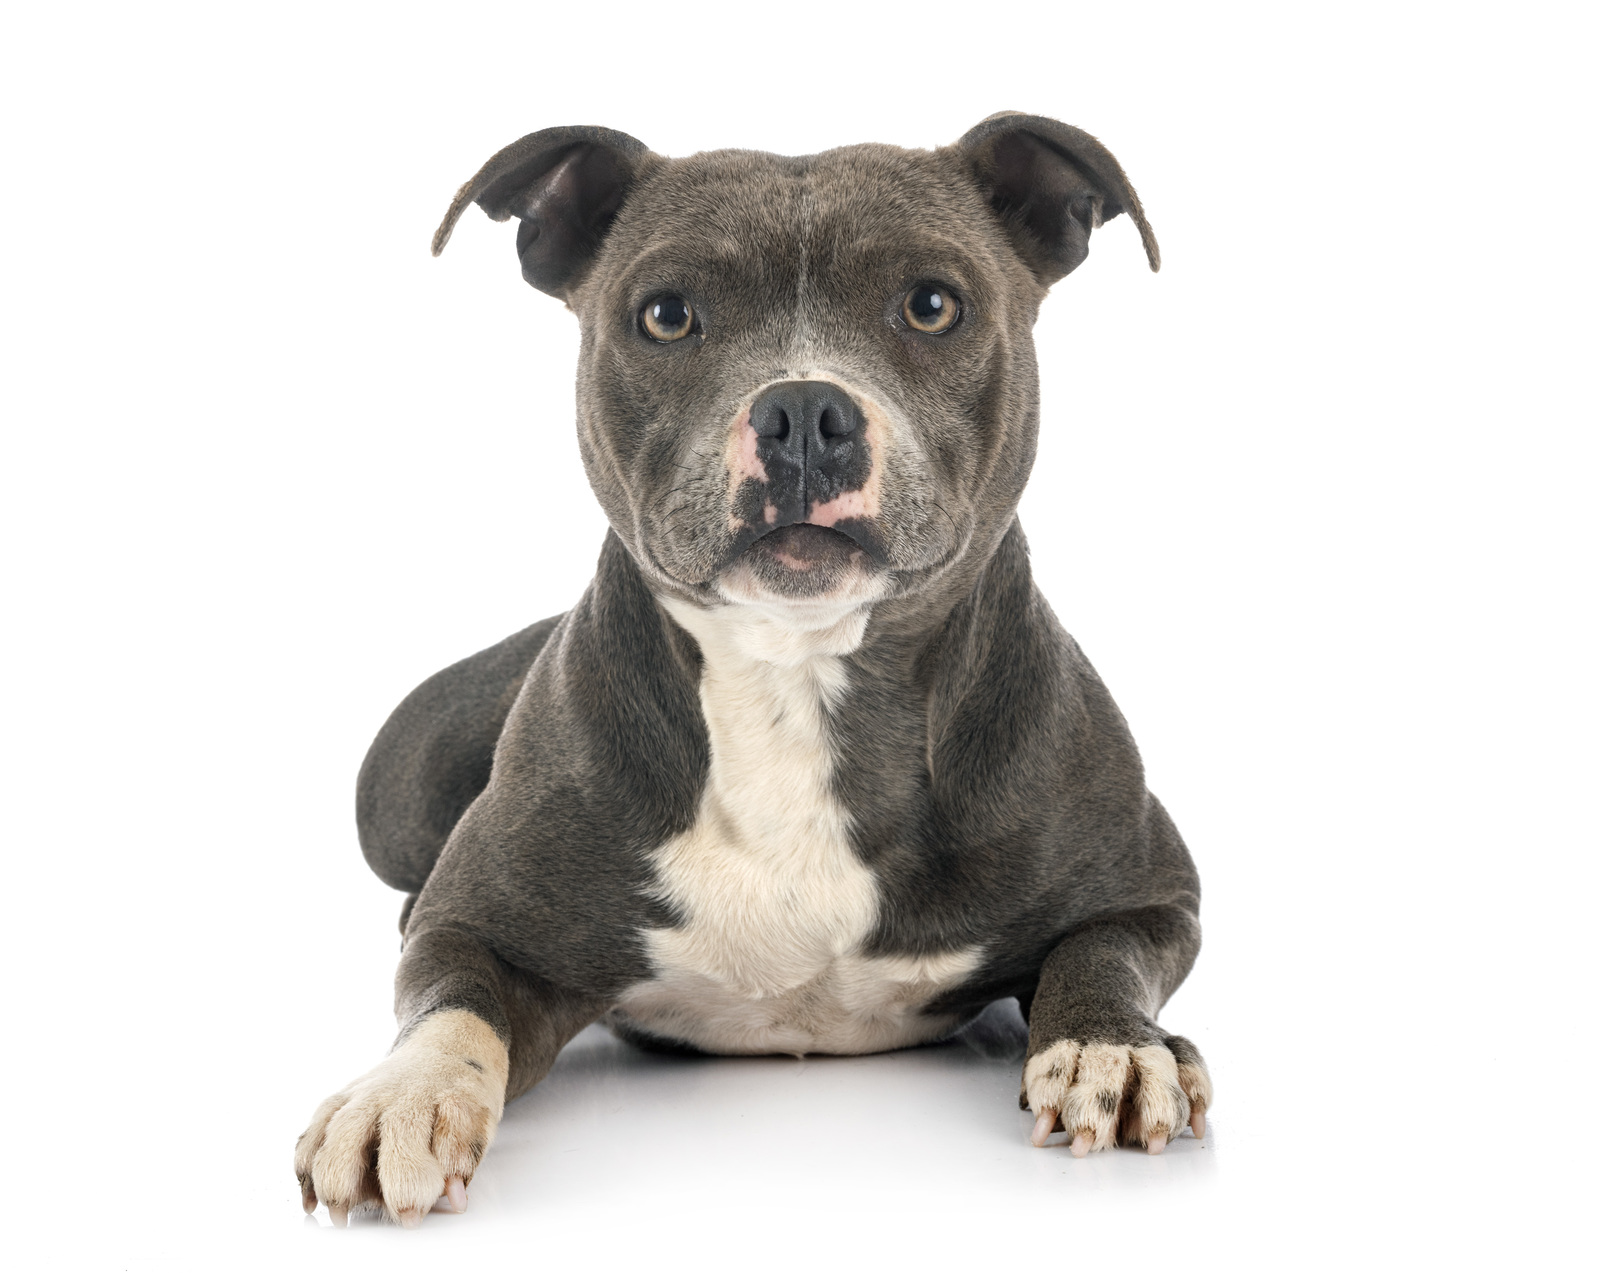 Why are so many pitbulls in shelters?